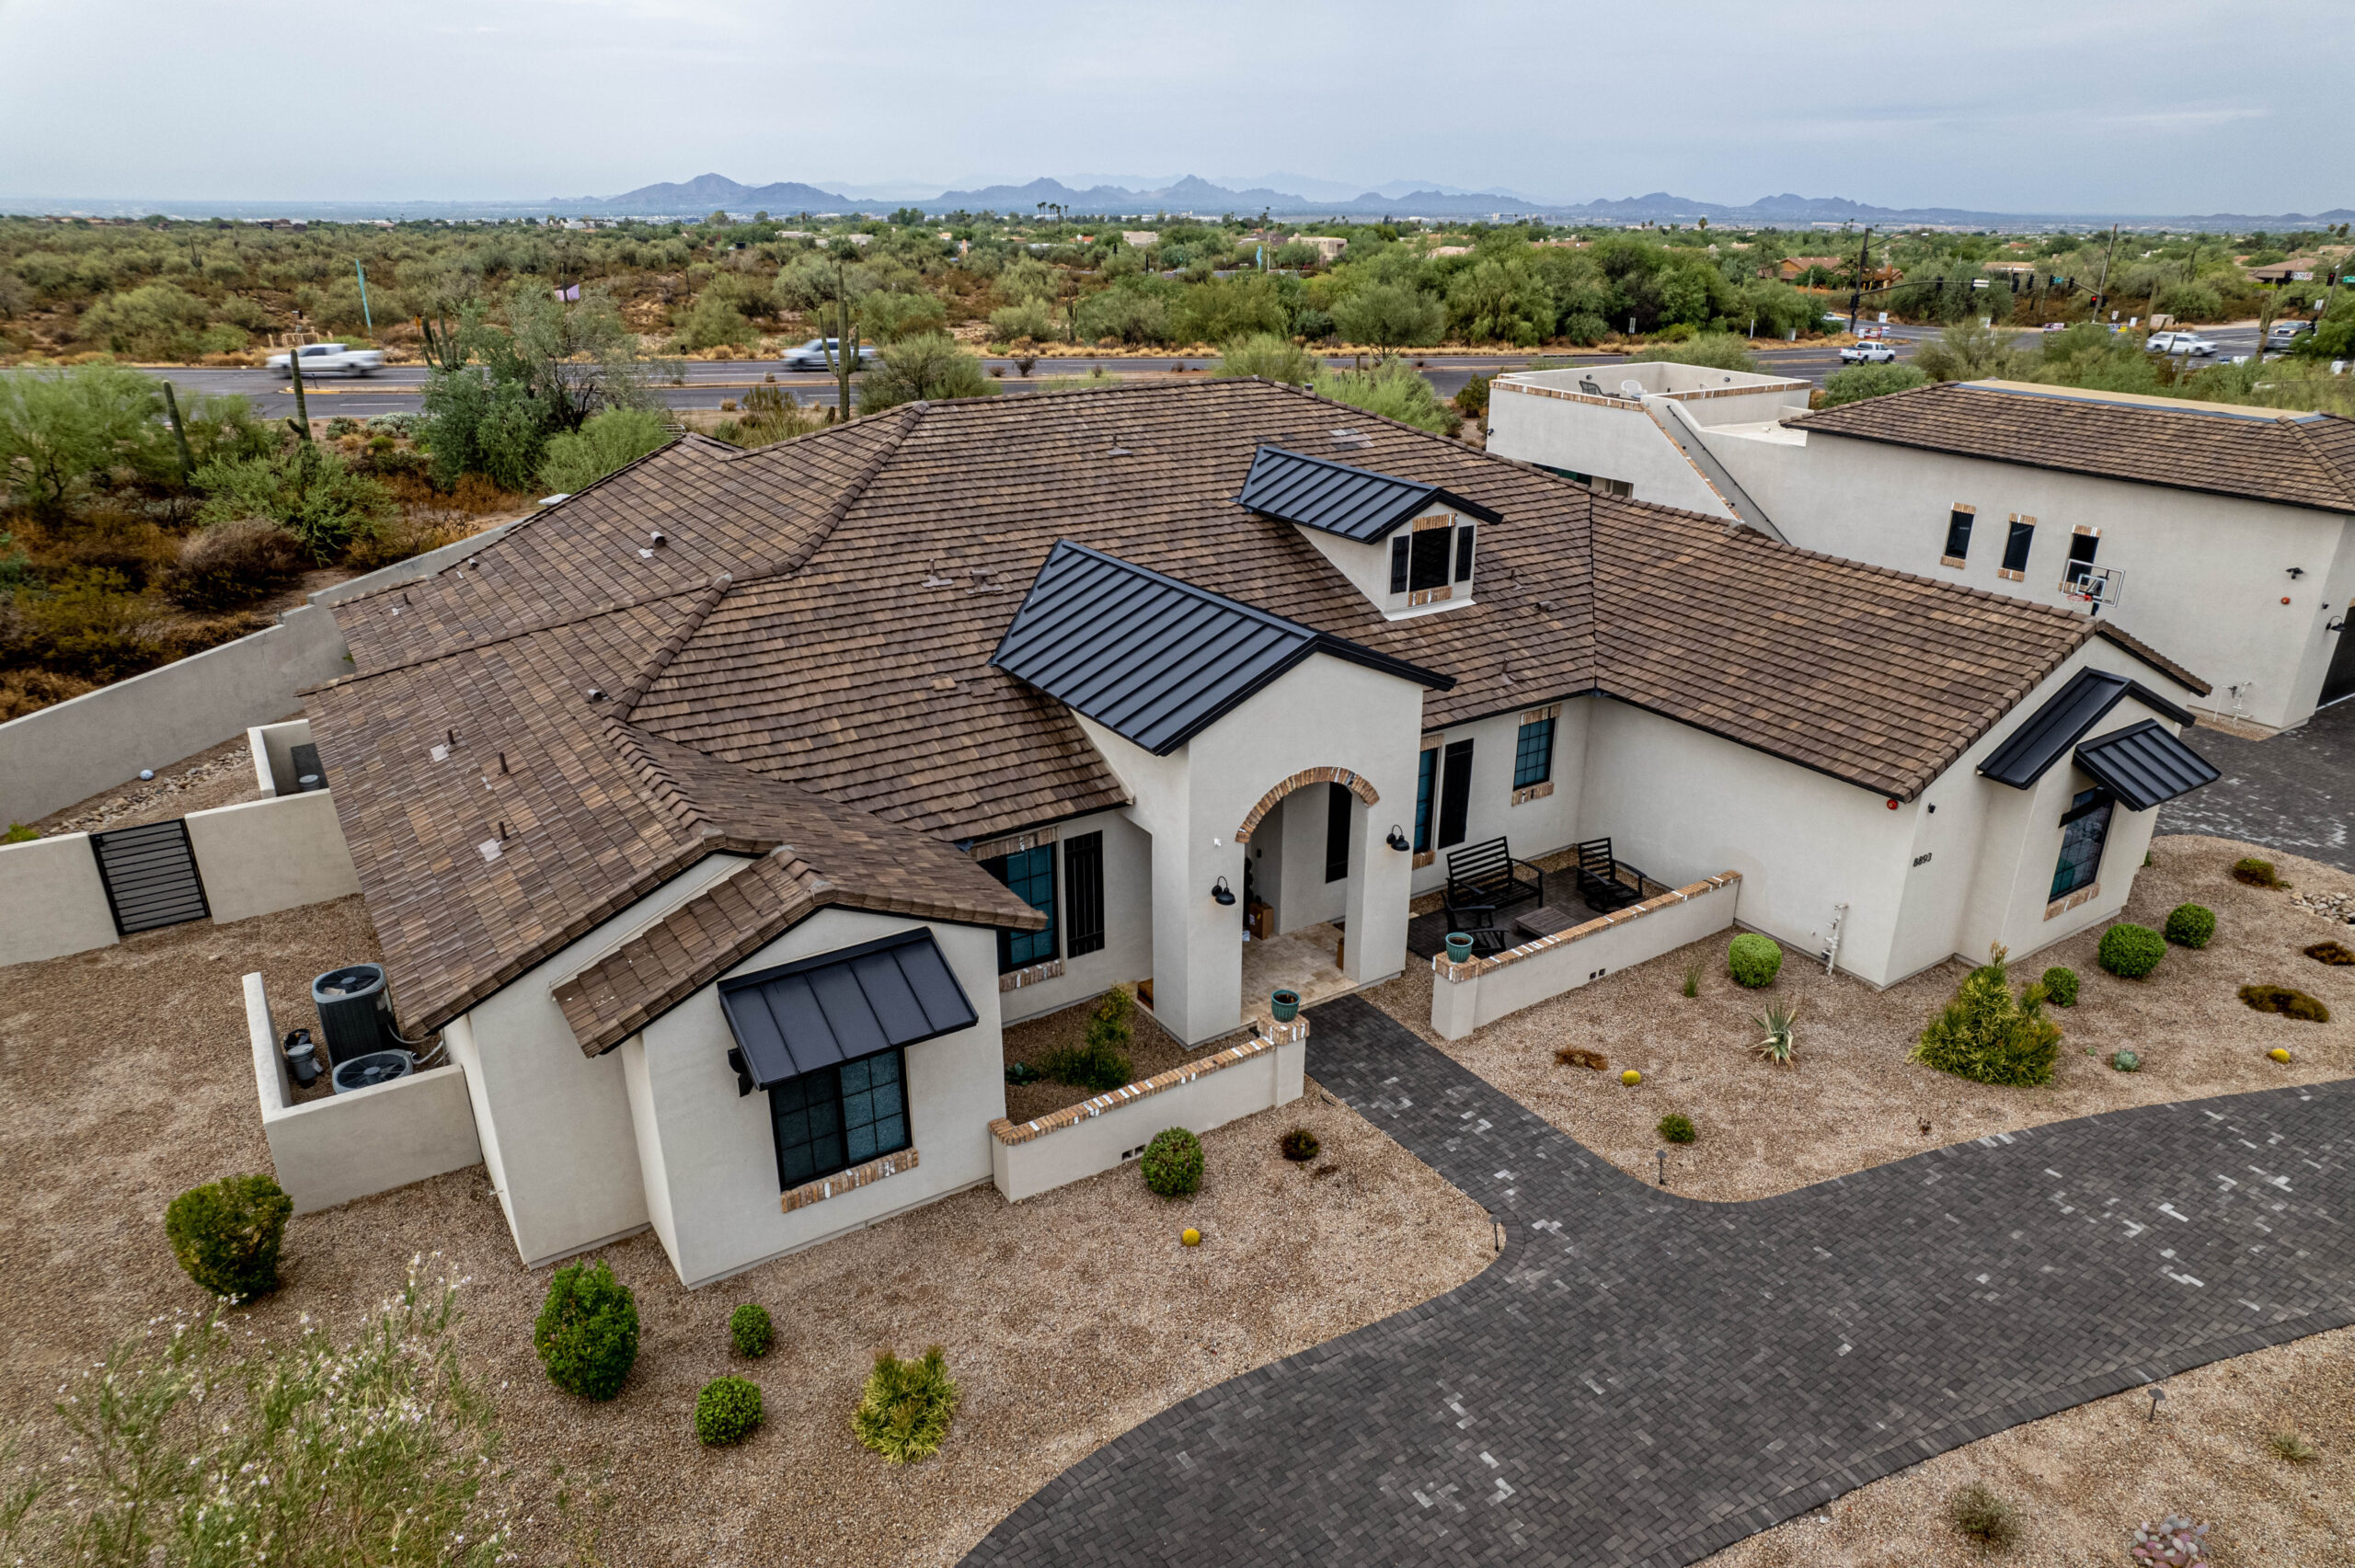 Overhead view of a Behmer re-roofing project in progress in Glendale.